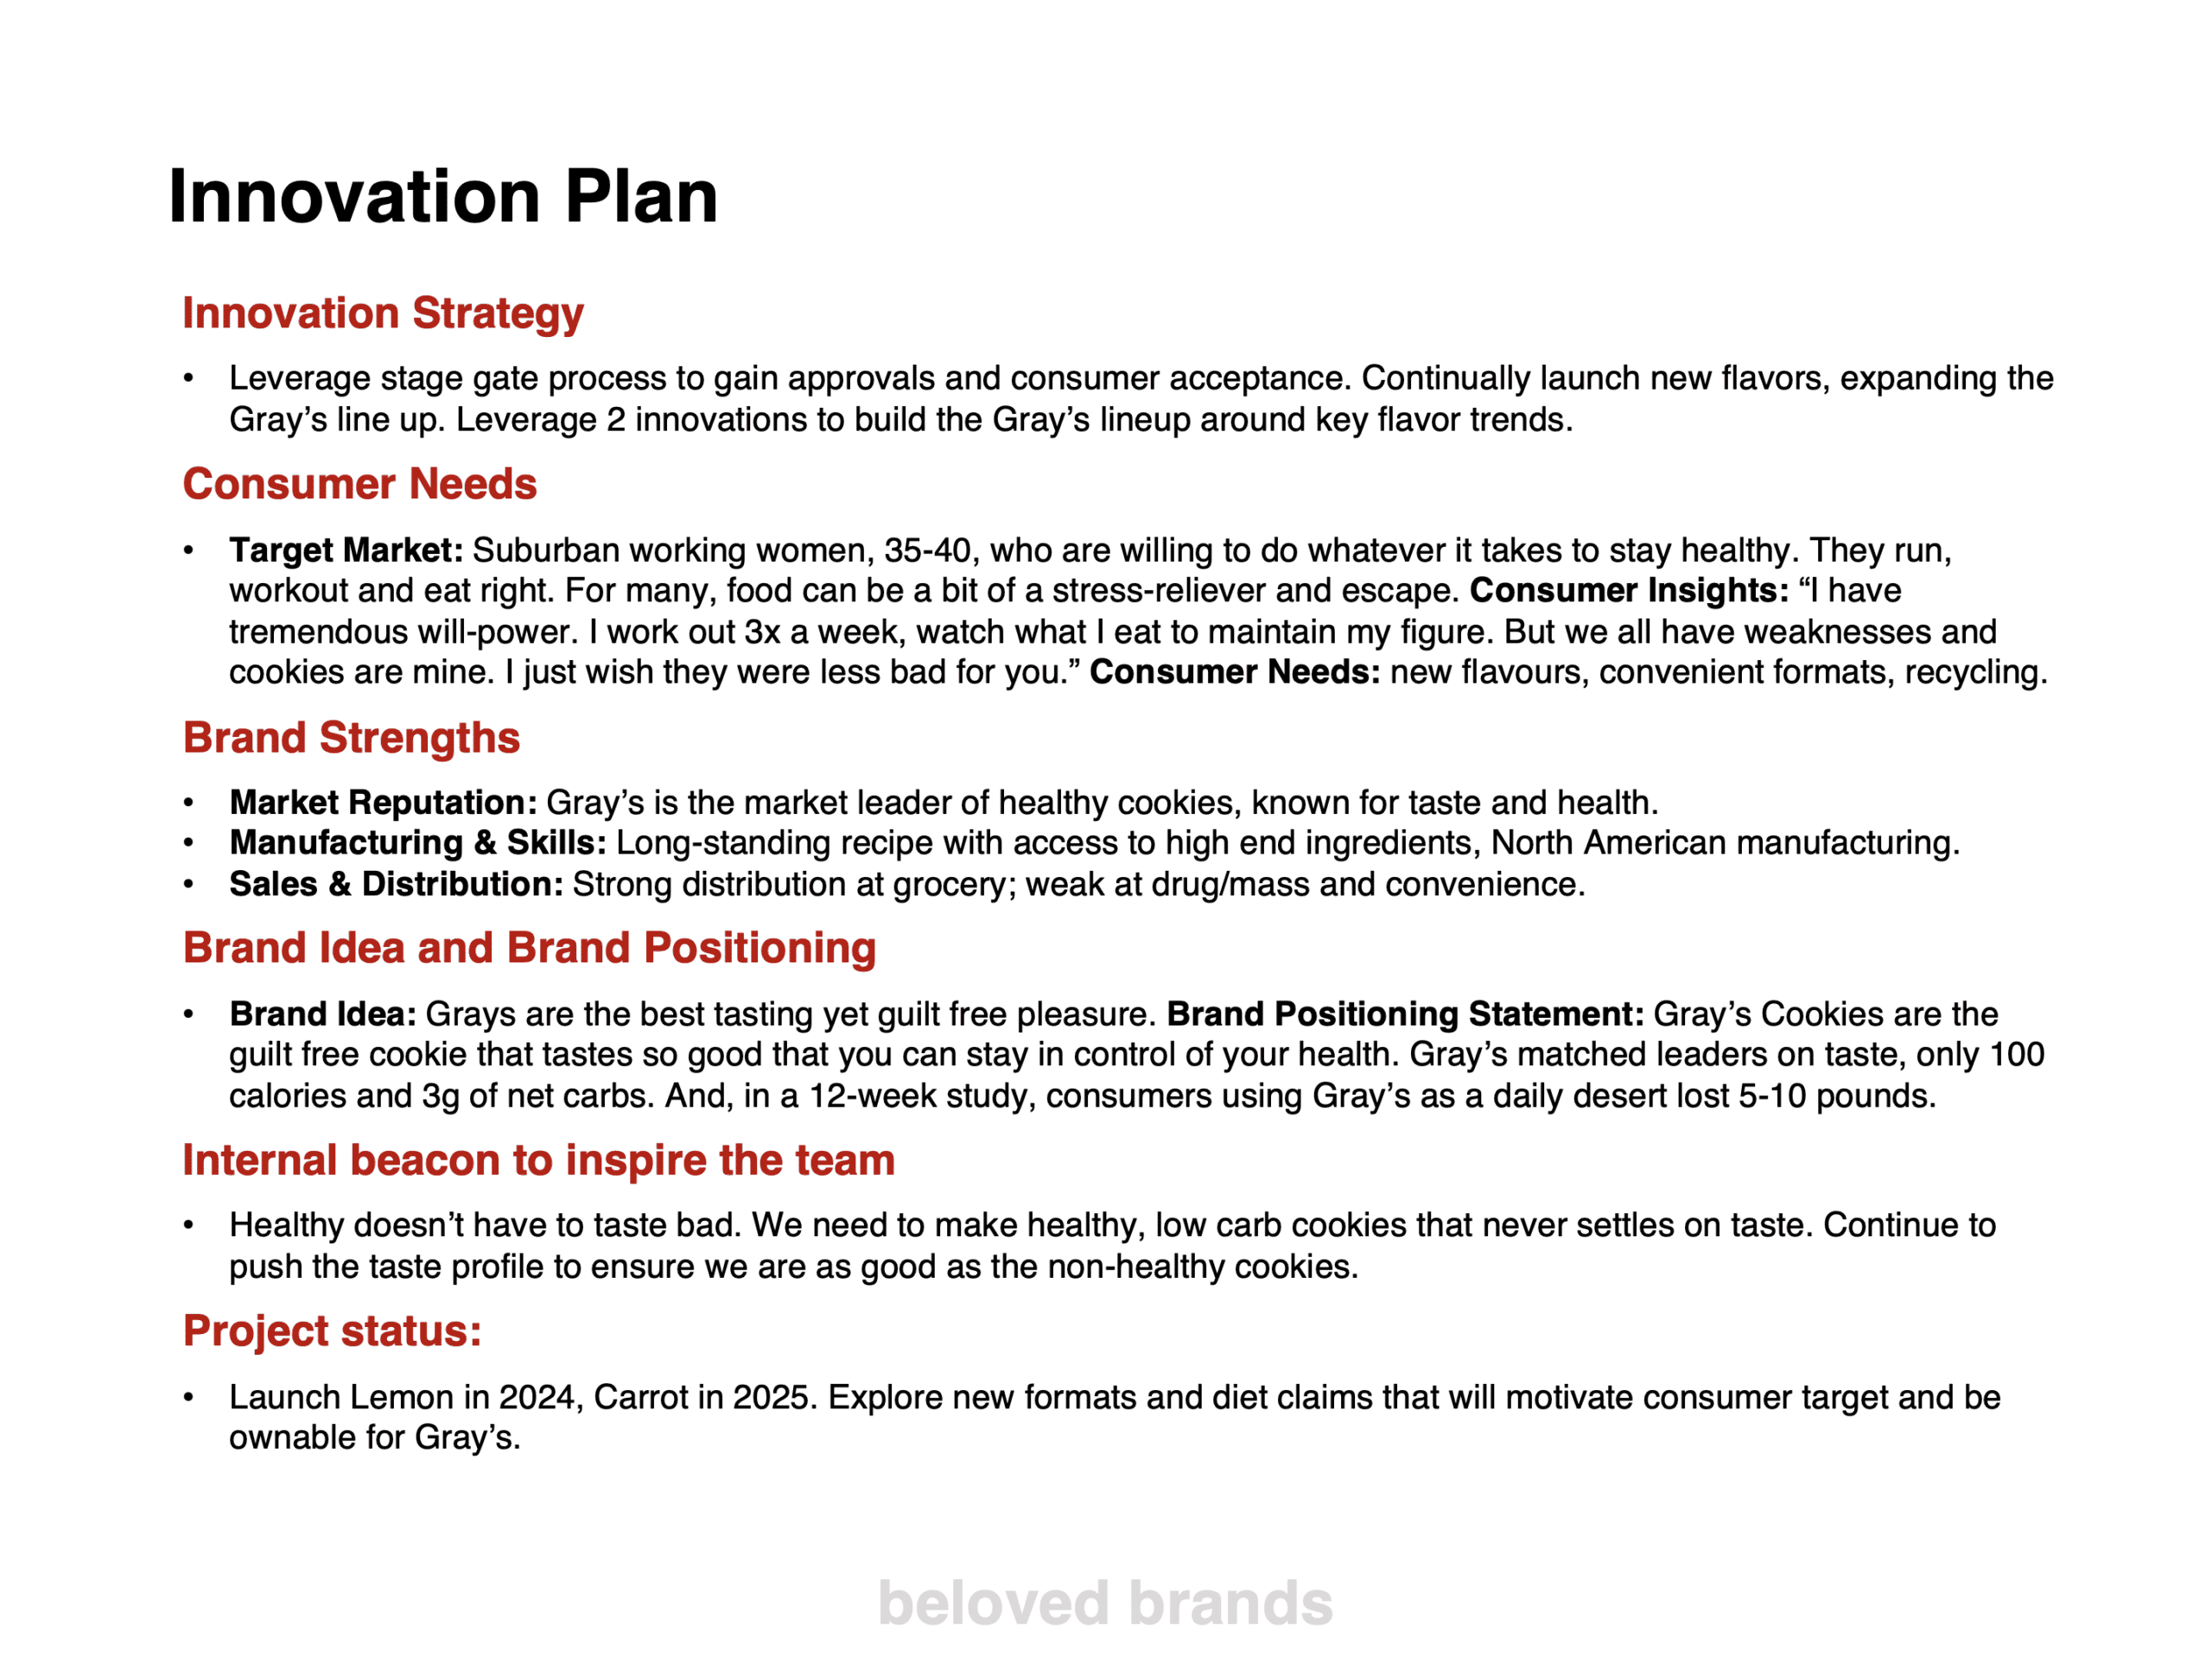 Innovation Plan as part of the marketing plan template